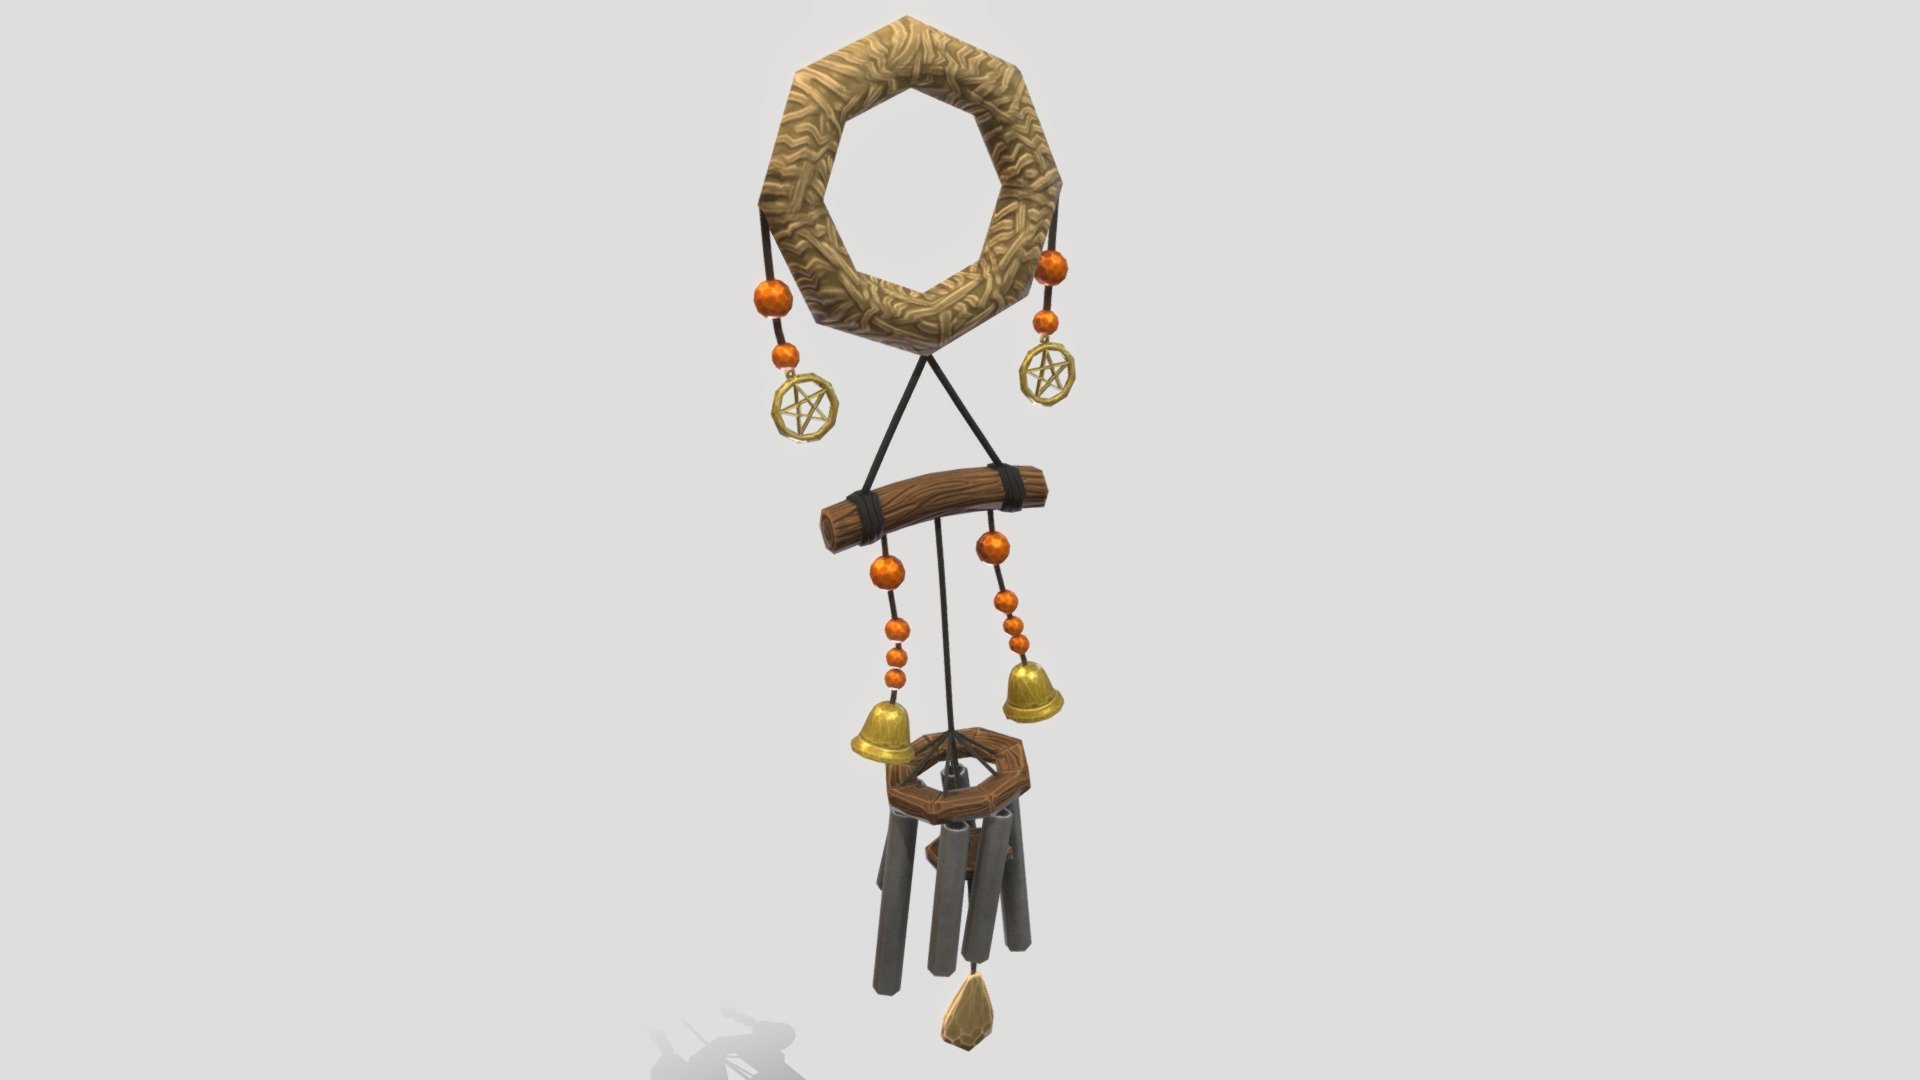 If you need additional work done do not hesitate to contact me, I am available for freelance work.

Witches inspired wind chimes, with pentagram decorations and bells.

Highpoly sculpted in Nomadsculpt. Lowpoly made in Blender. 
Highpoly and Lowpoly-model in Blend-file is included in additional file.
Model and Concept by Me, Enya Gerber 3d model